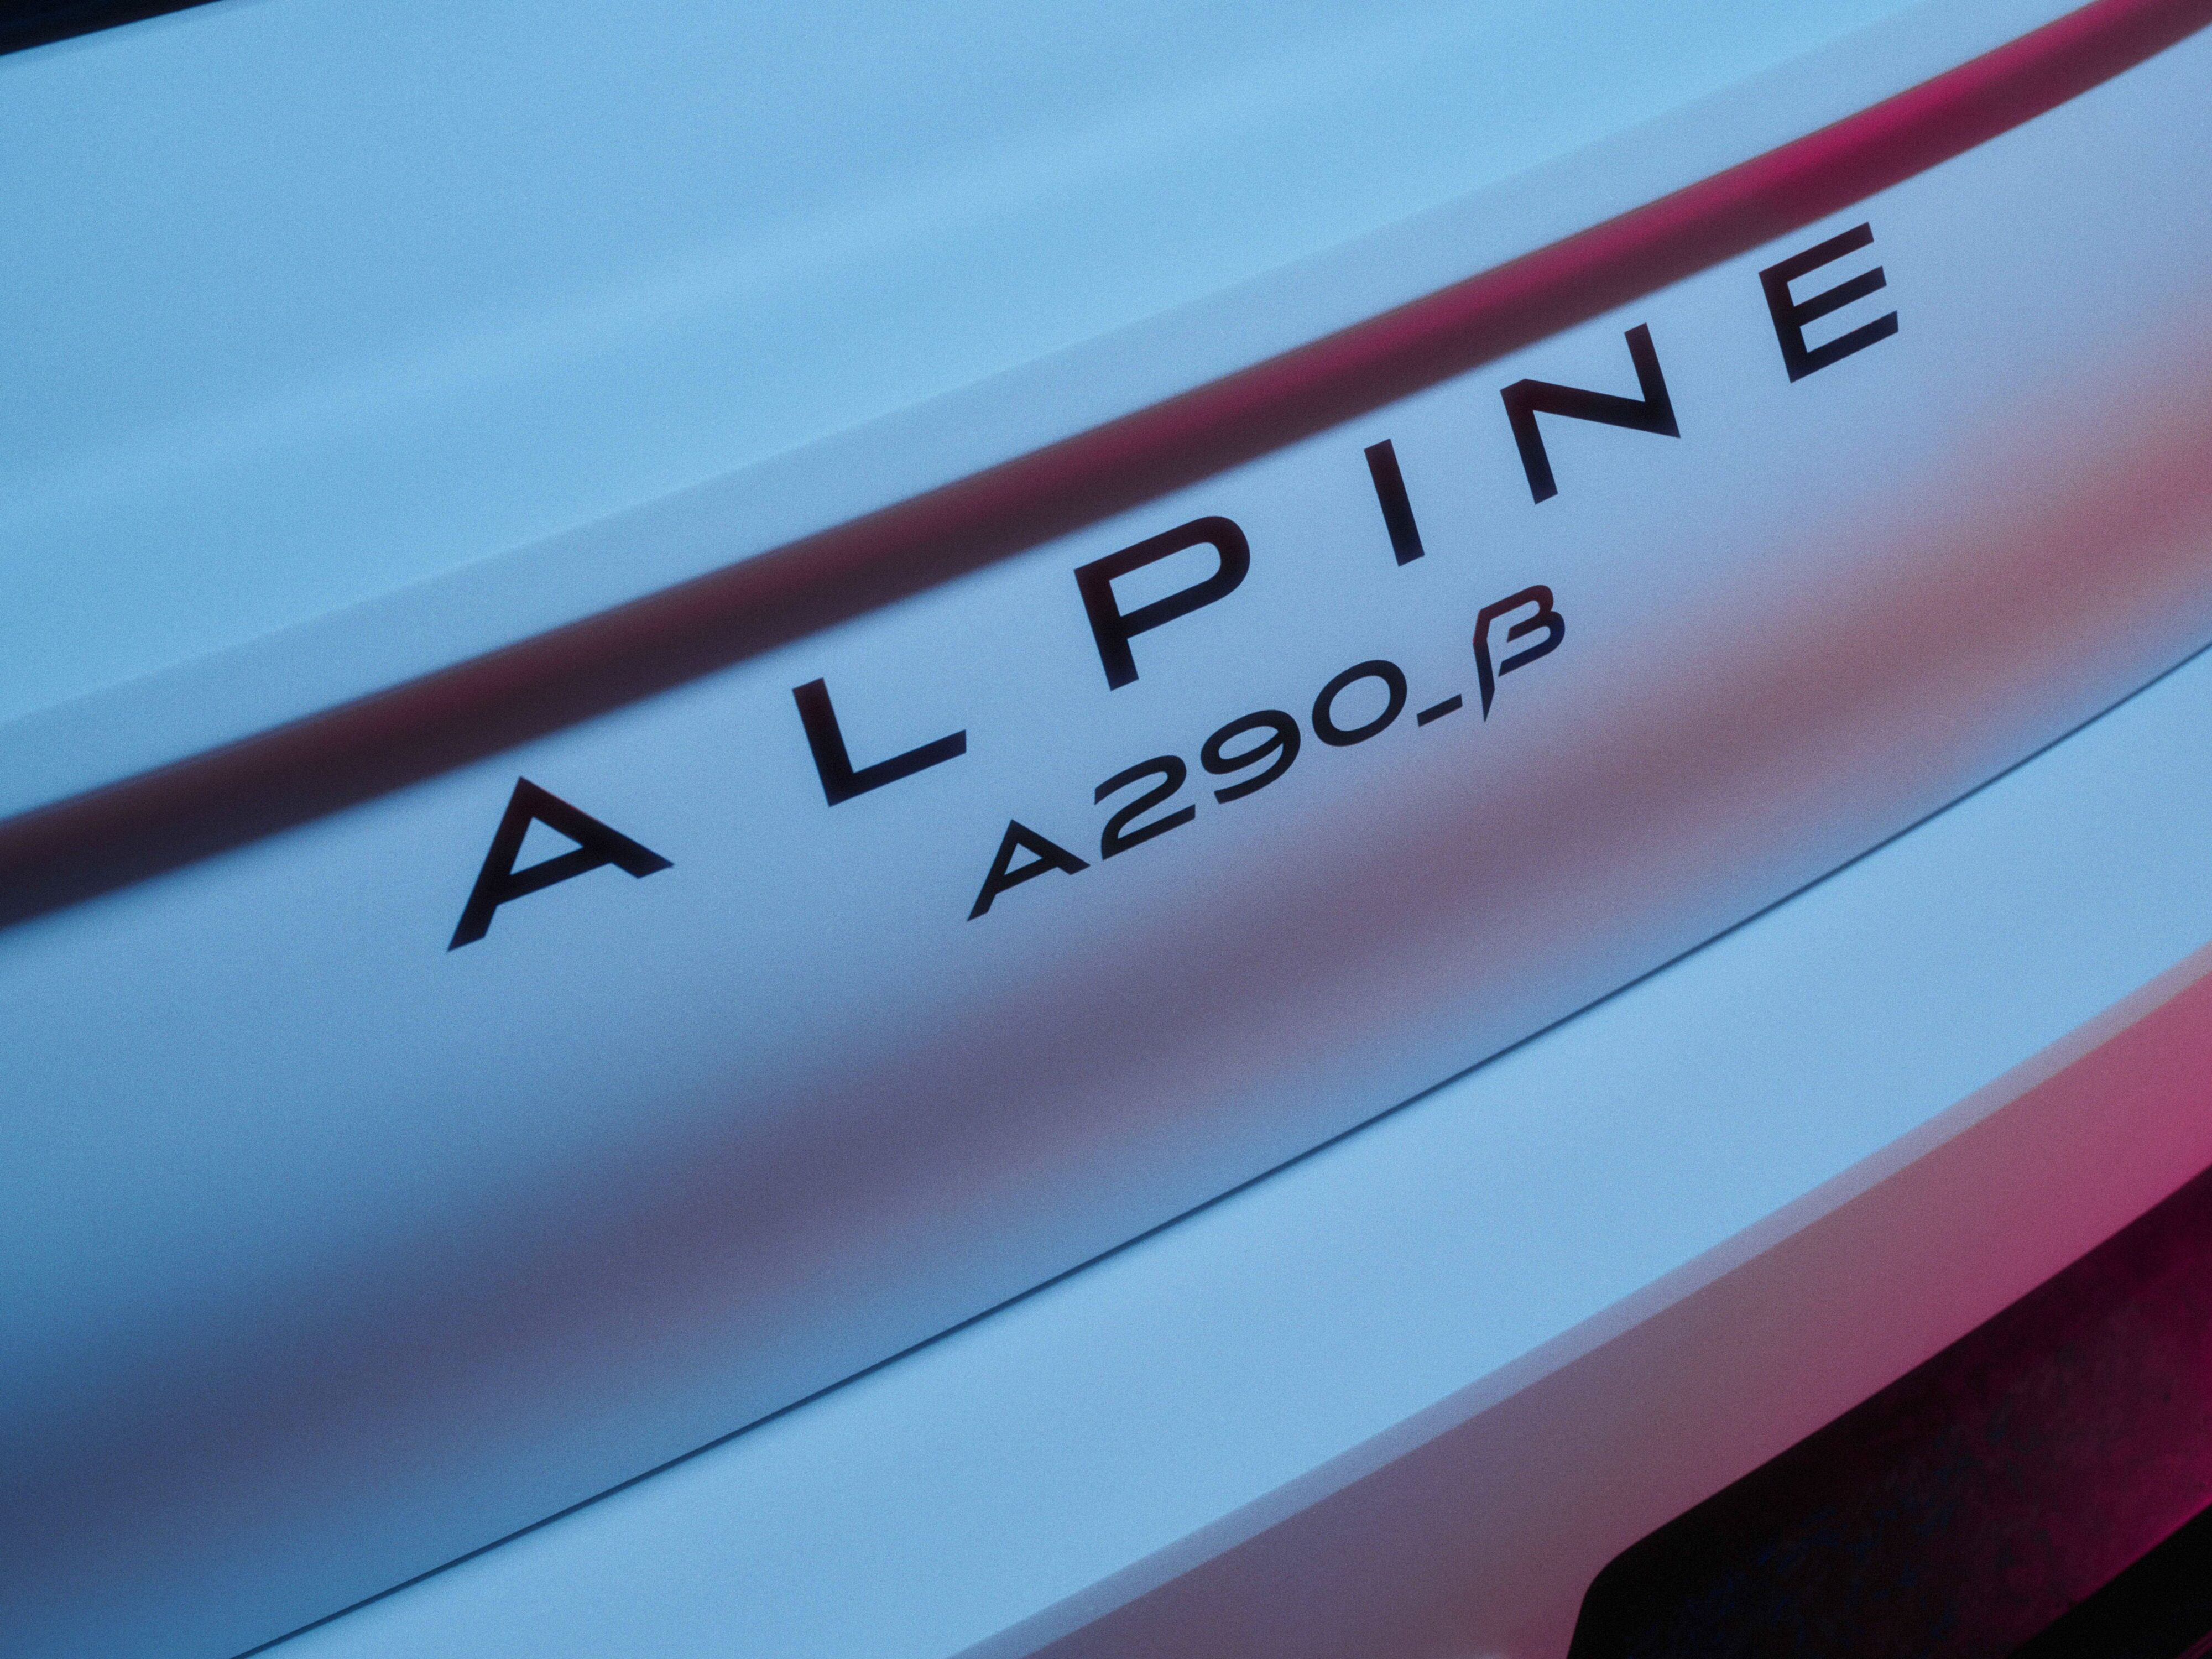 A teaser of the upcoming Alpine A290_B show car